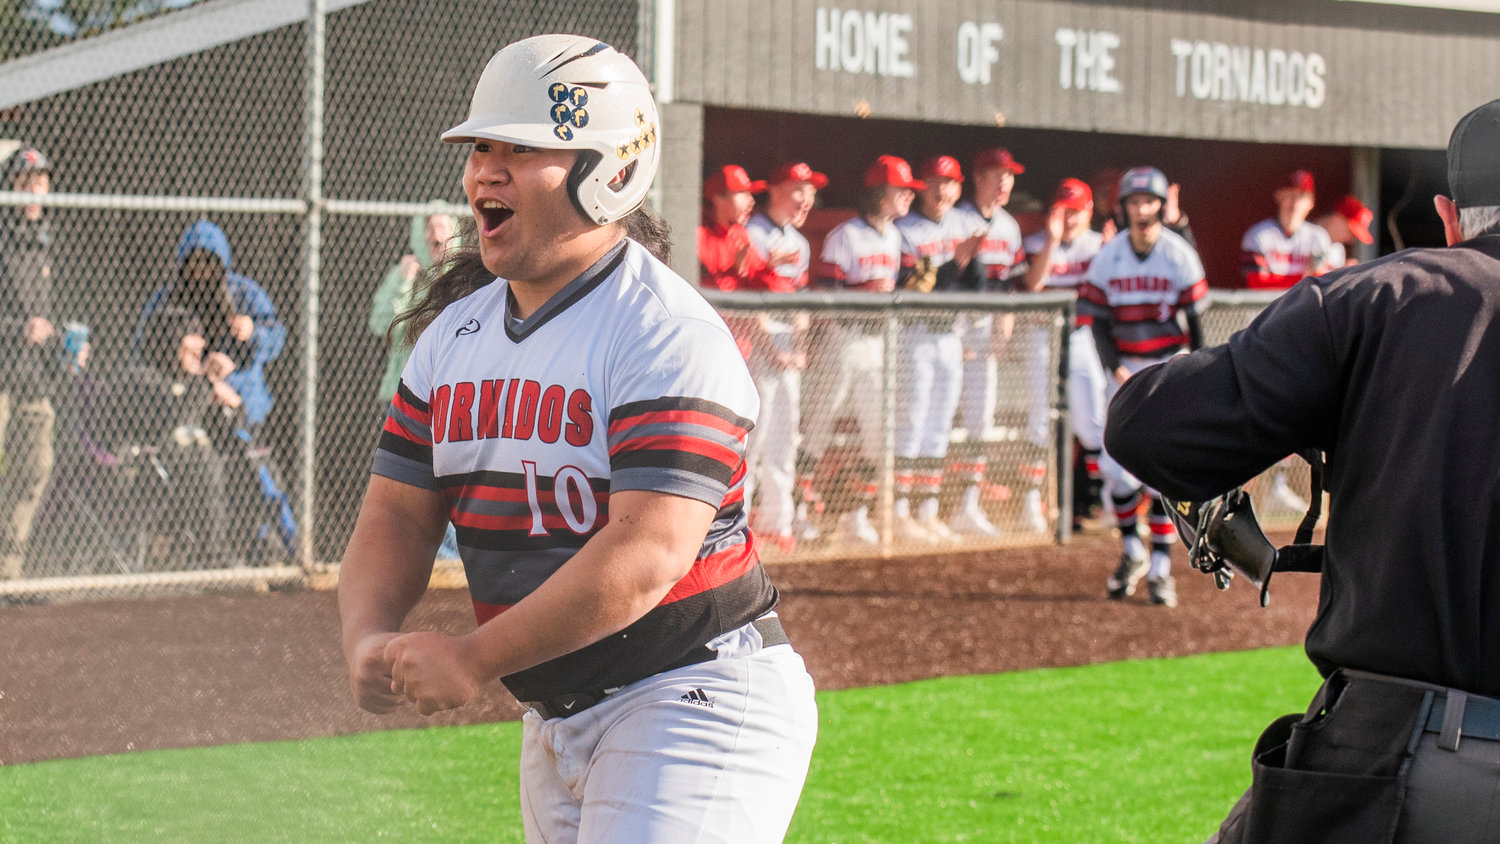 Yelm’s Kolby Henry (10) celebrates after sliding in safe at home during a game against Timberline High School on Tuesday, March 15.